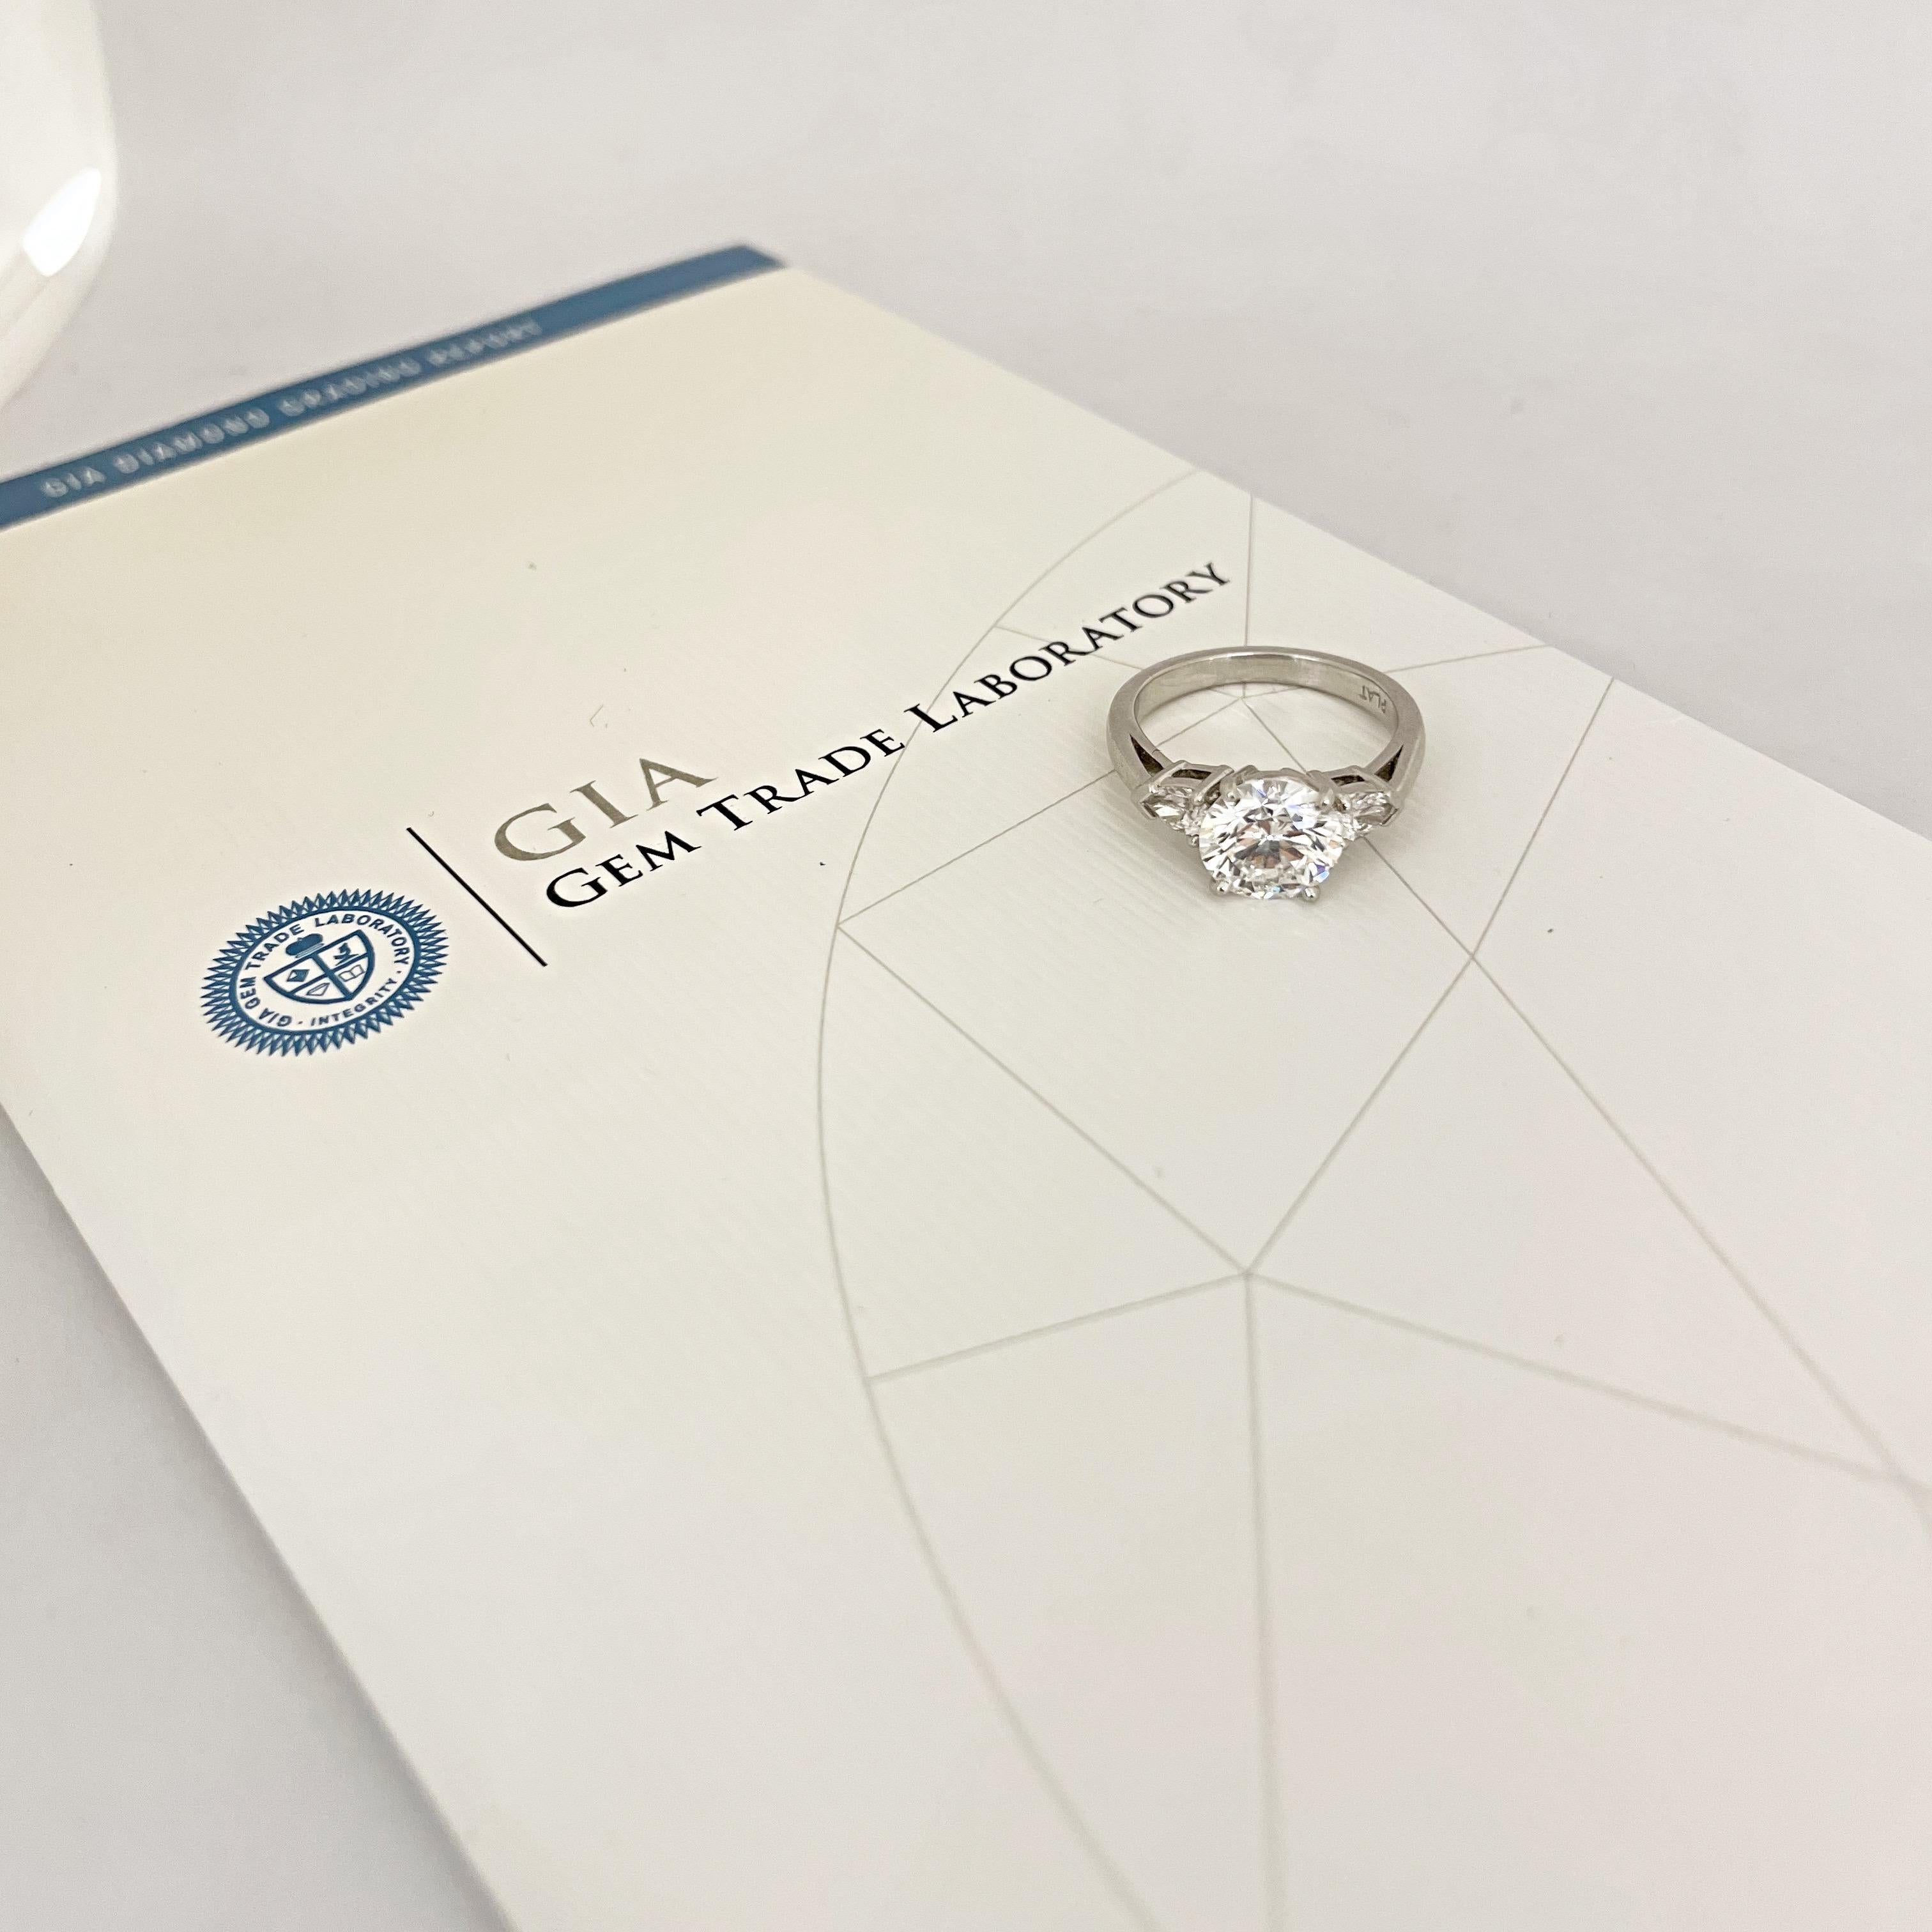 This stunning 2.07ct GIA certified Round Brilliant F color VS2 clarity center stone is hand set in platinum with pear shaped side stones. 
The pear shaped side stones are F color VS2 and weigh 0.38cts. 

Purchase includes complimentary ring sizing,